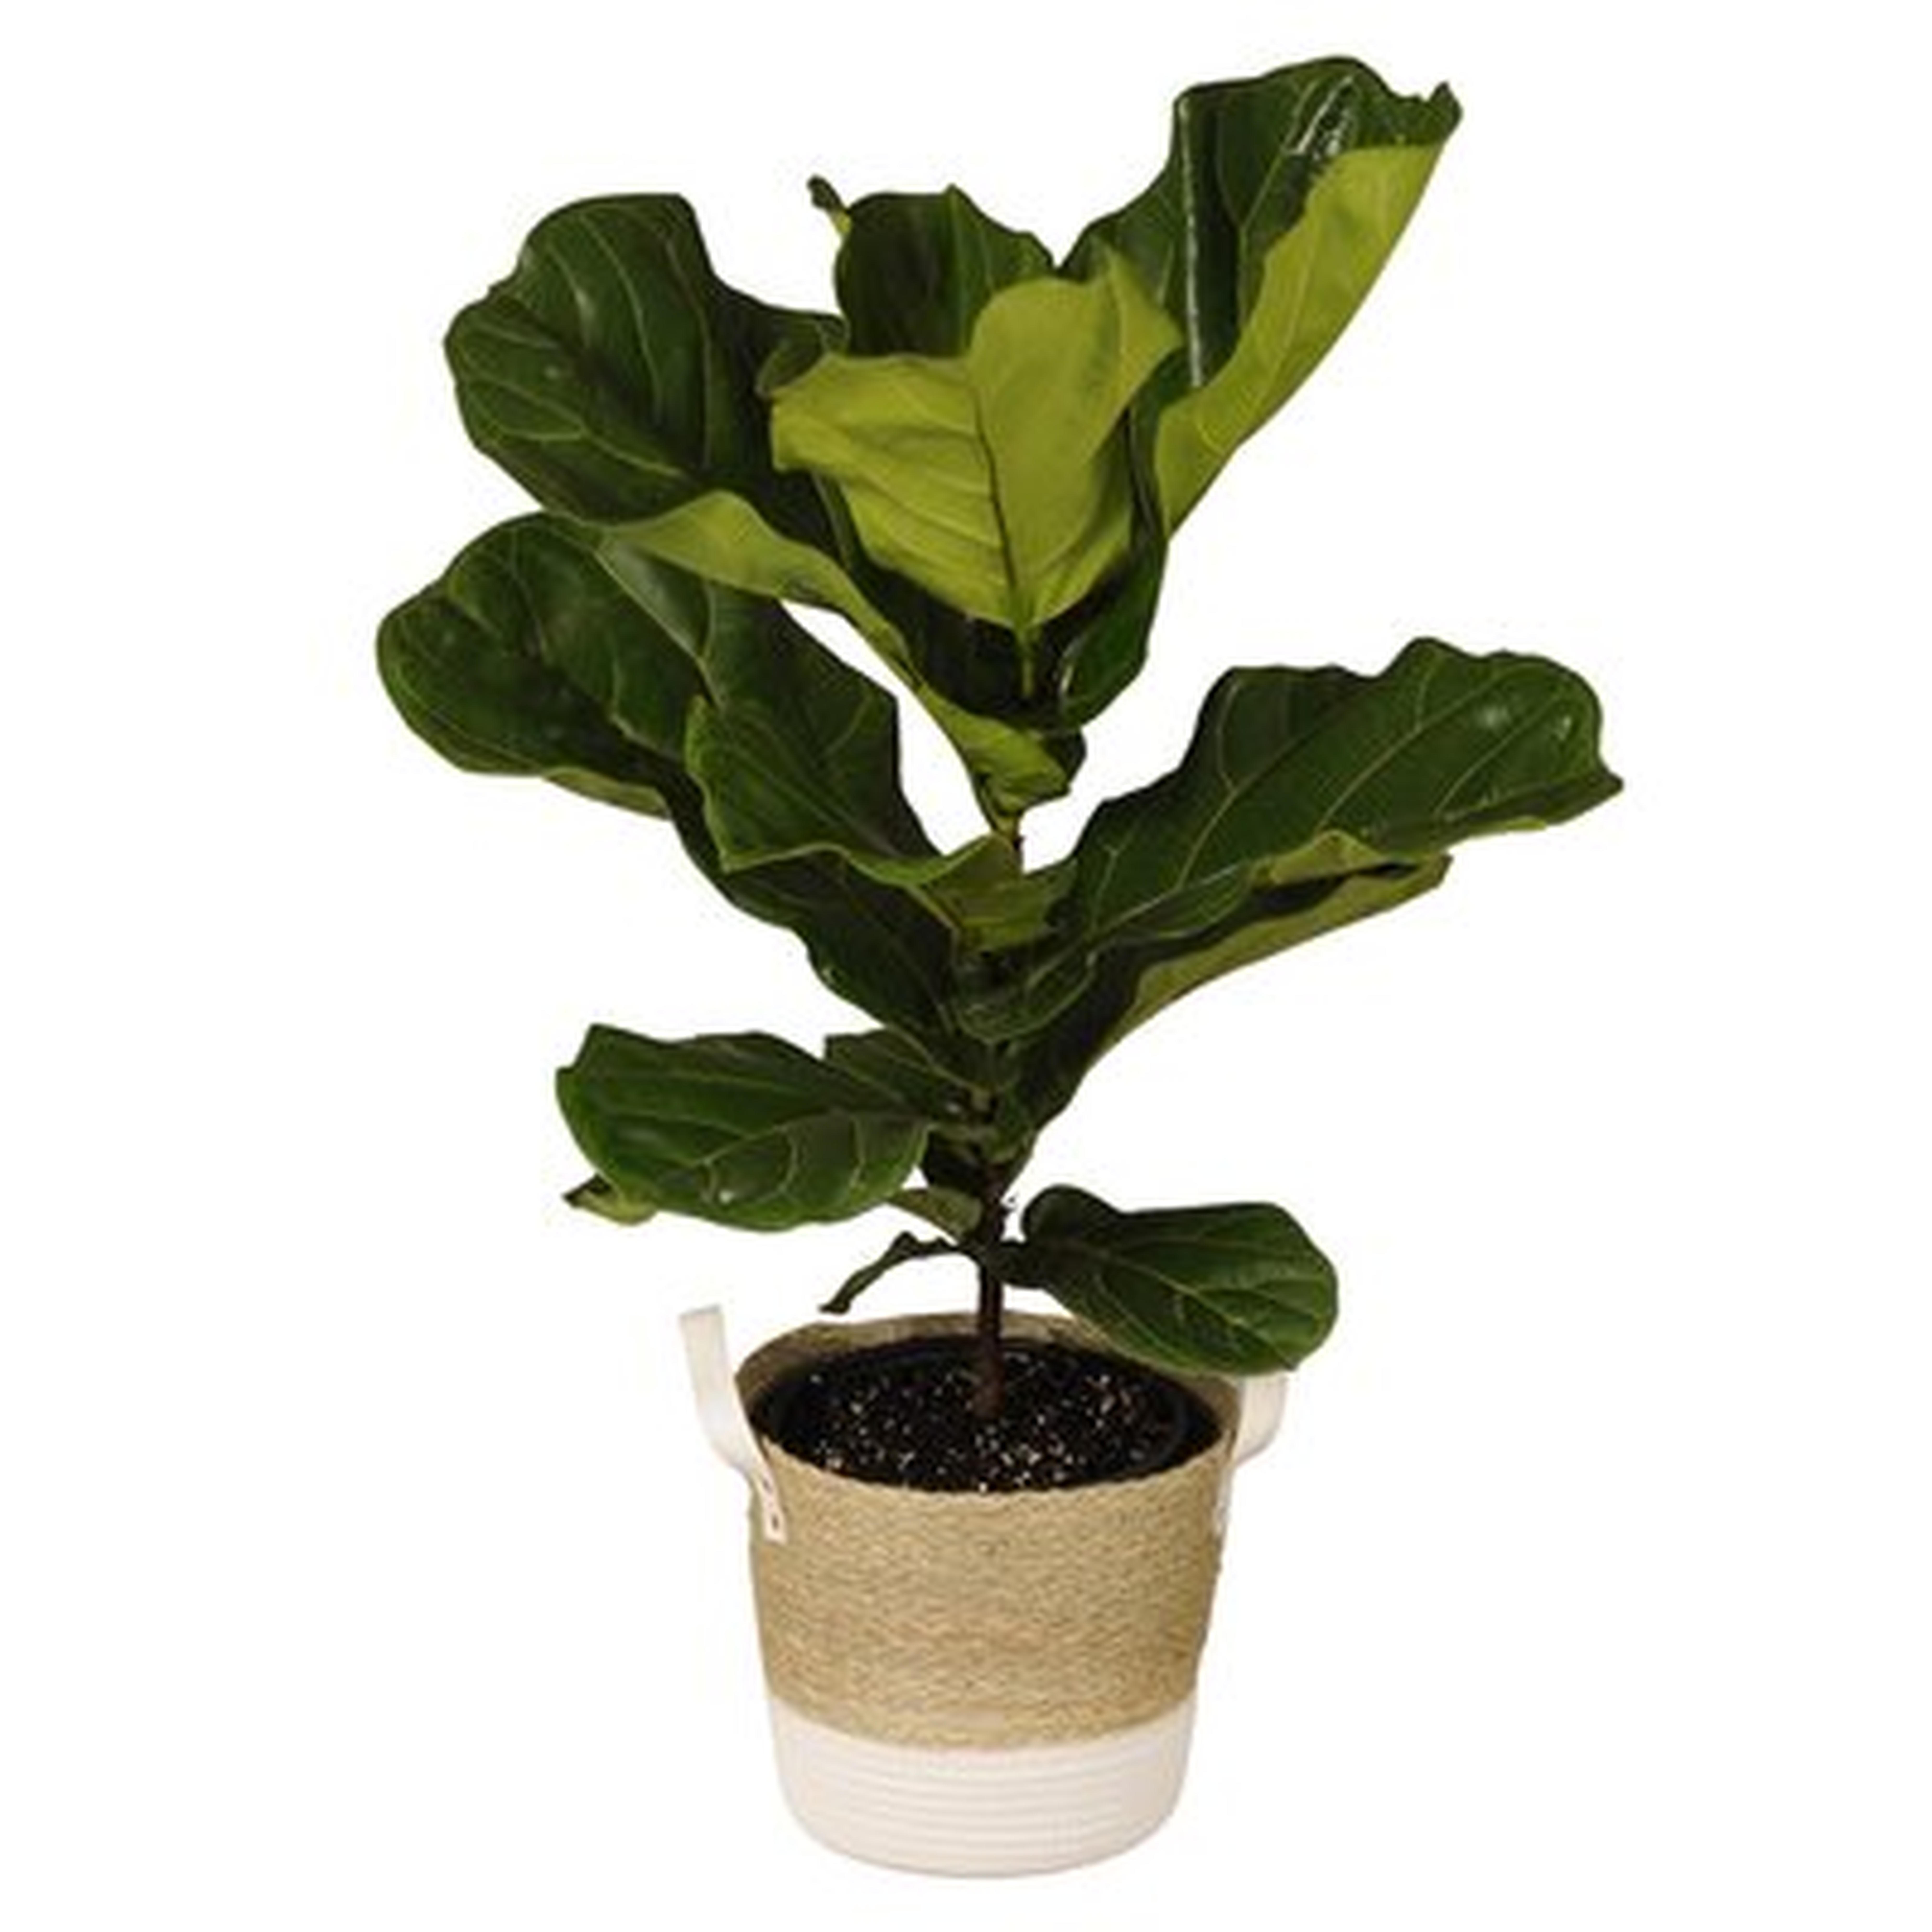 Fiddle Leaf Fig Bush Live Indoor Houseplant In 10 Inch Beige And White Whicker Basket - Wayfair